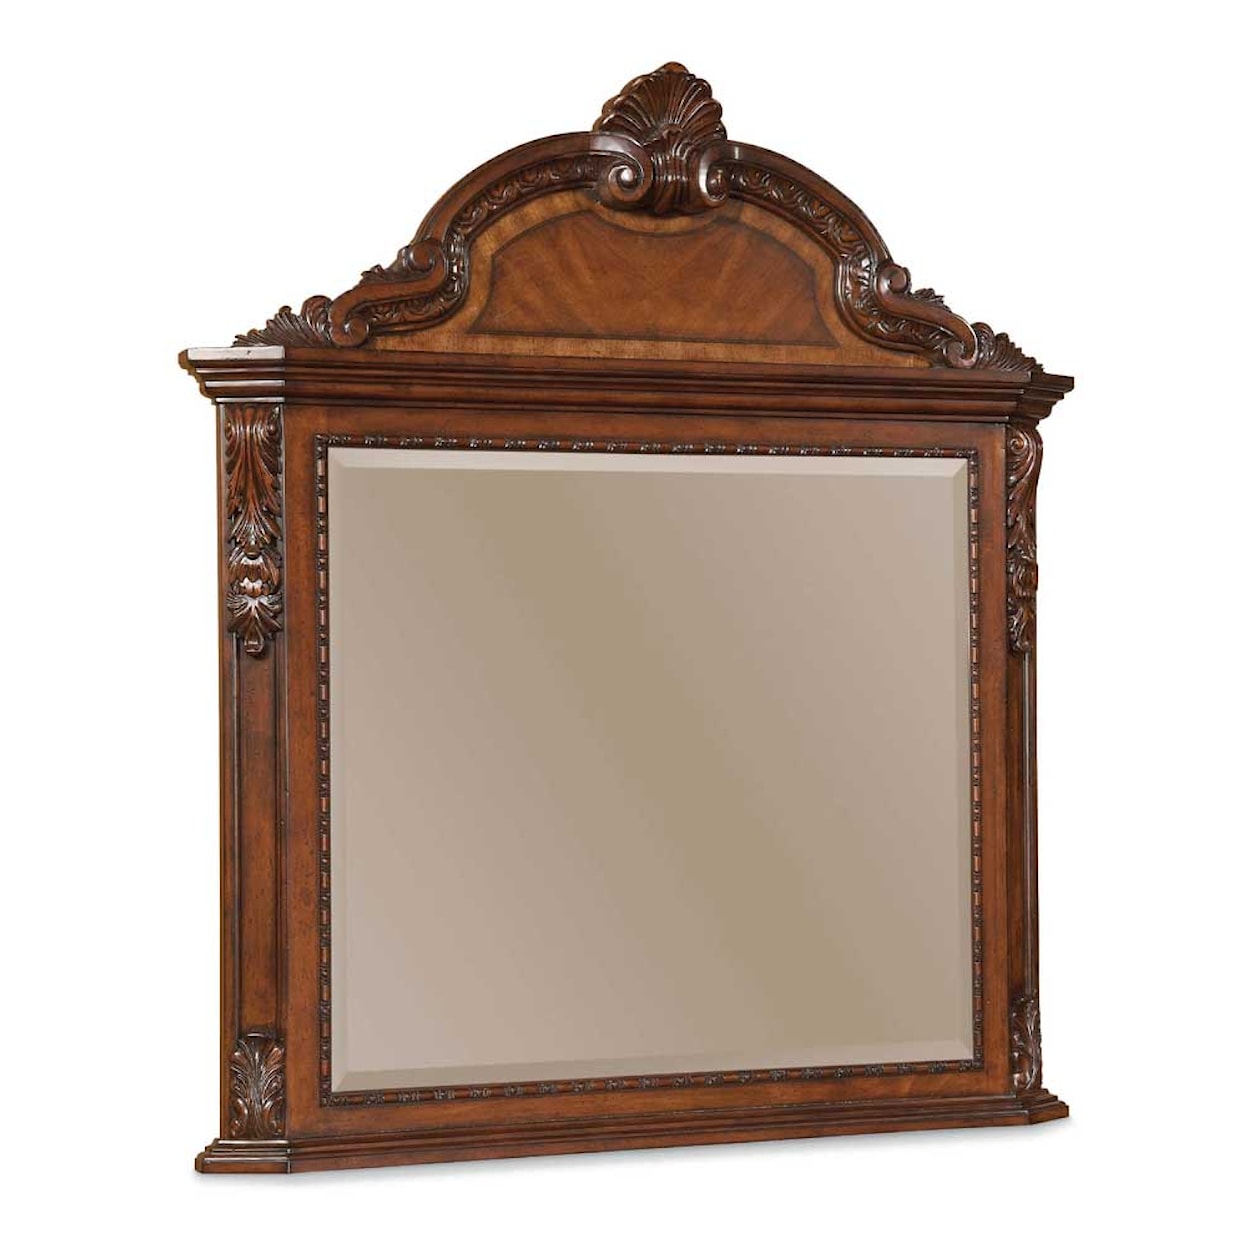 A.R.T. Furniture Inc Old World Vertical Mirror